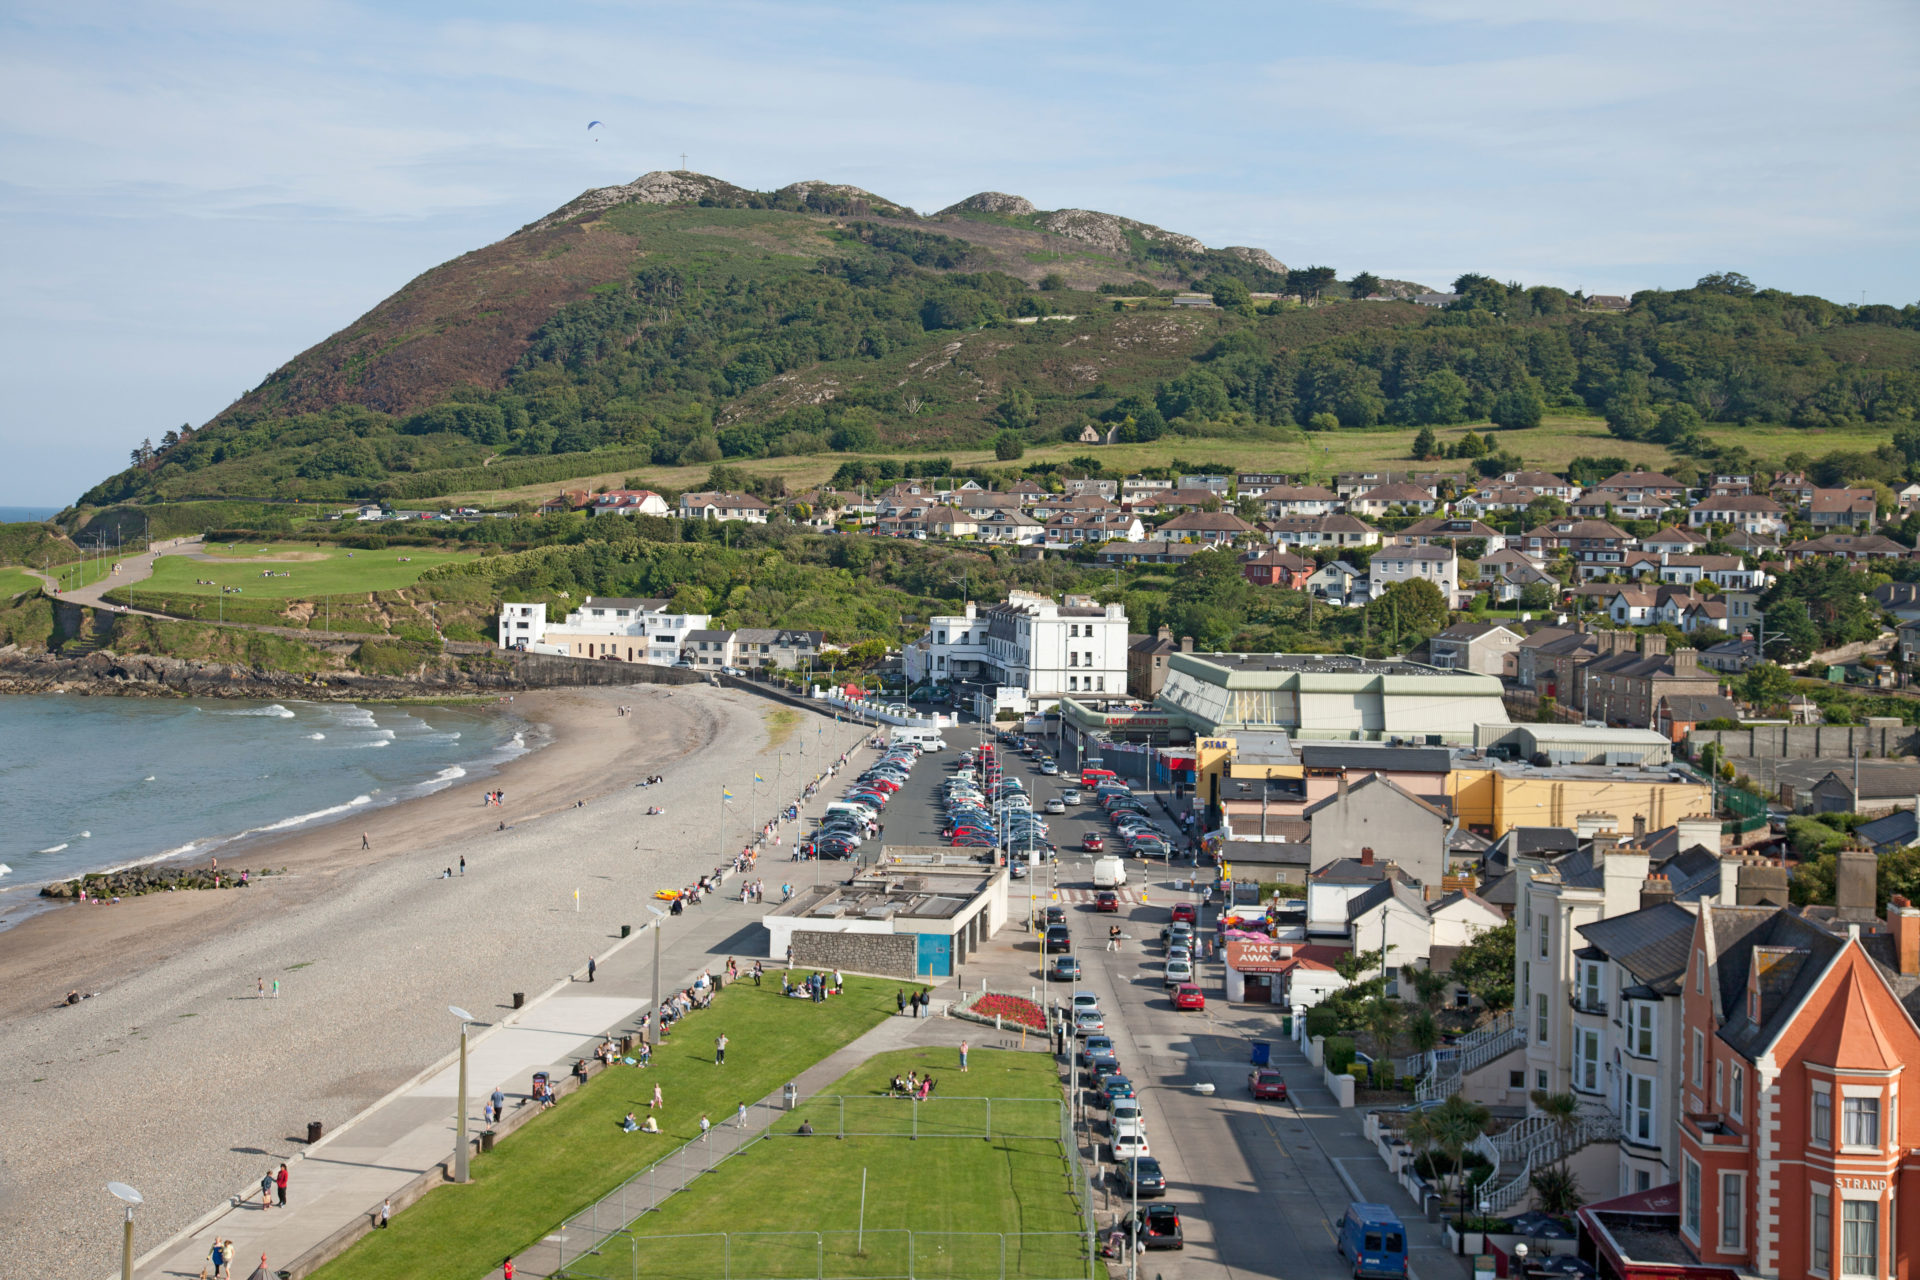 Bray named among world's 'most underrated travel destinations' | Newstalk